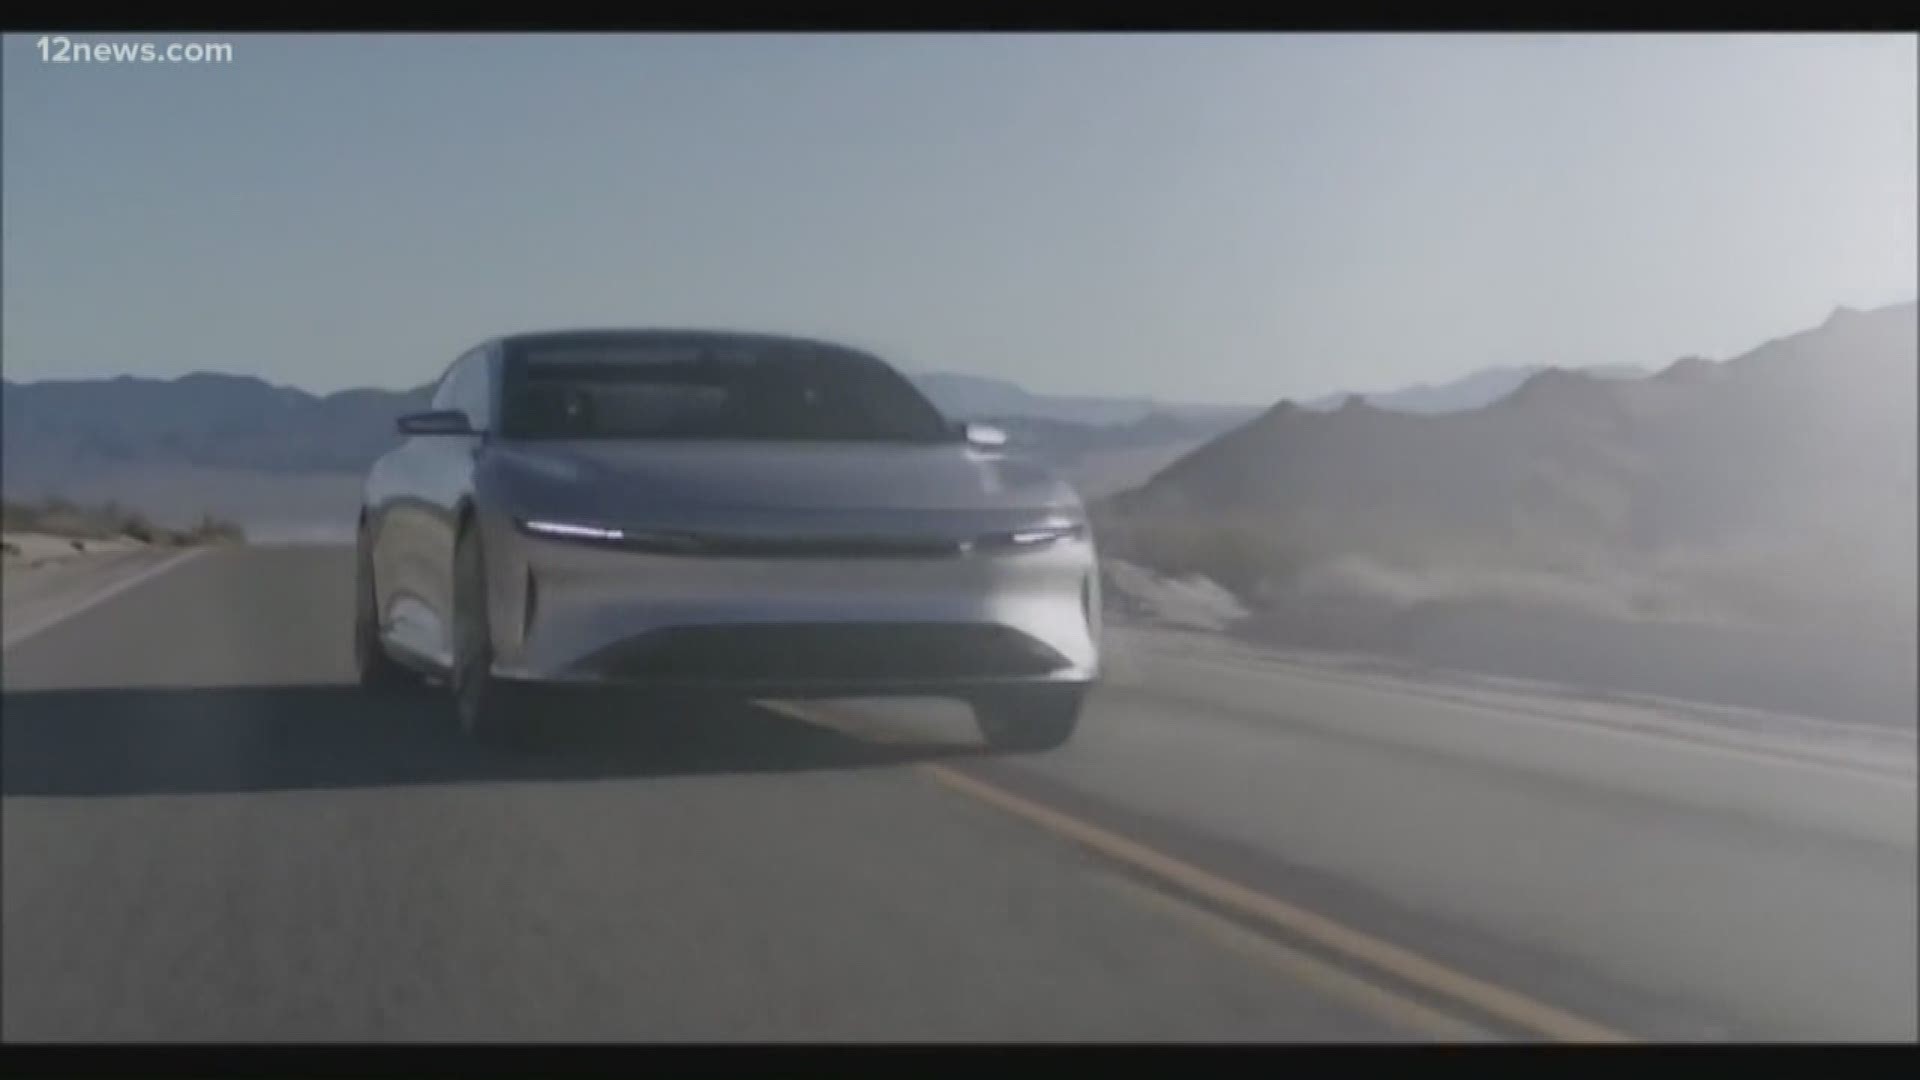 Governor Doug Ducey broke ground on a massive electric car plant in Casa Grande on Monday. Lucid Motors is moving into the state with a $700 million plant.